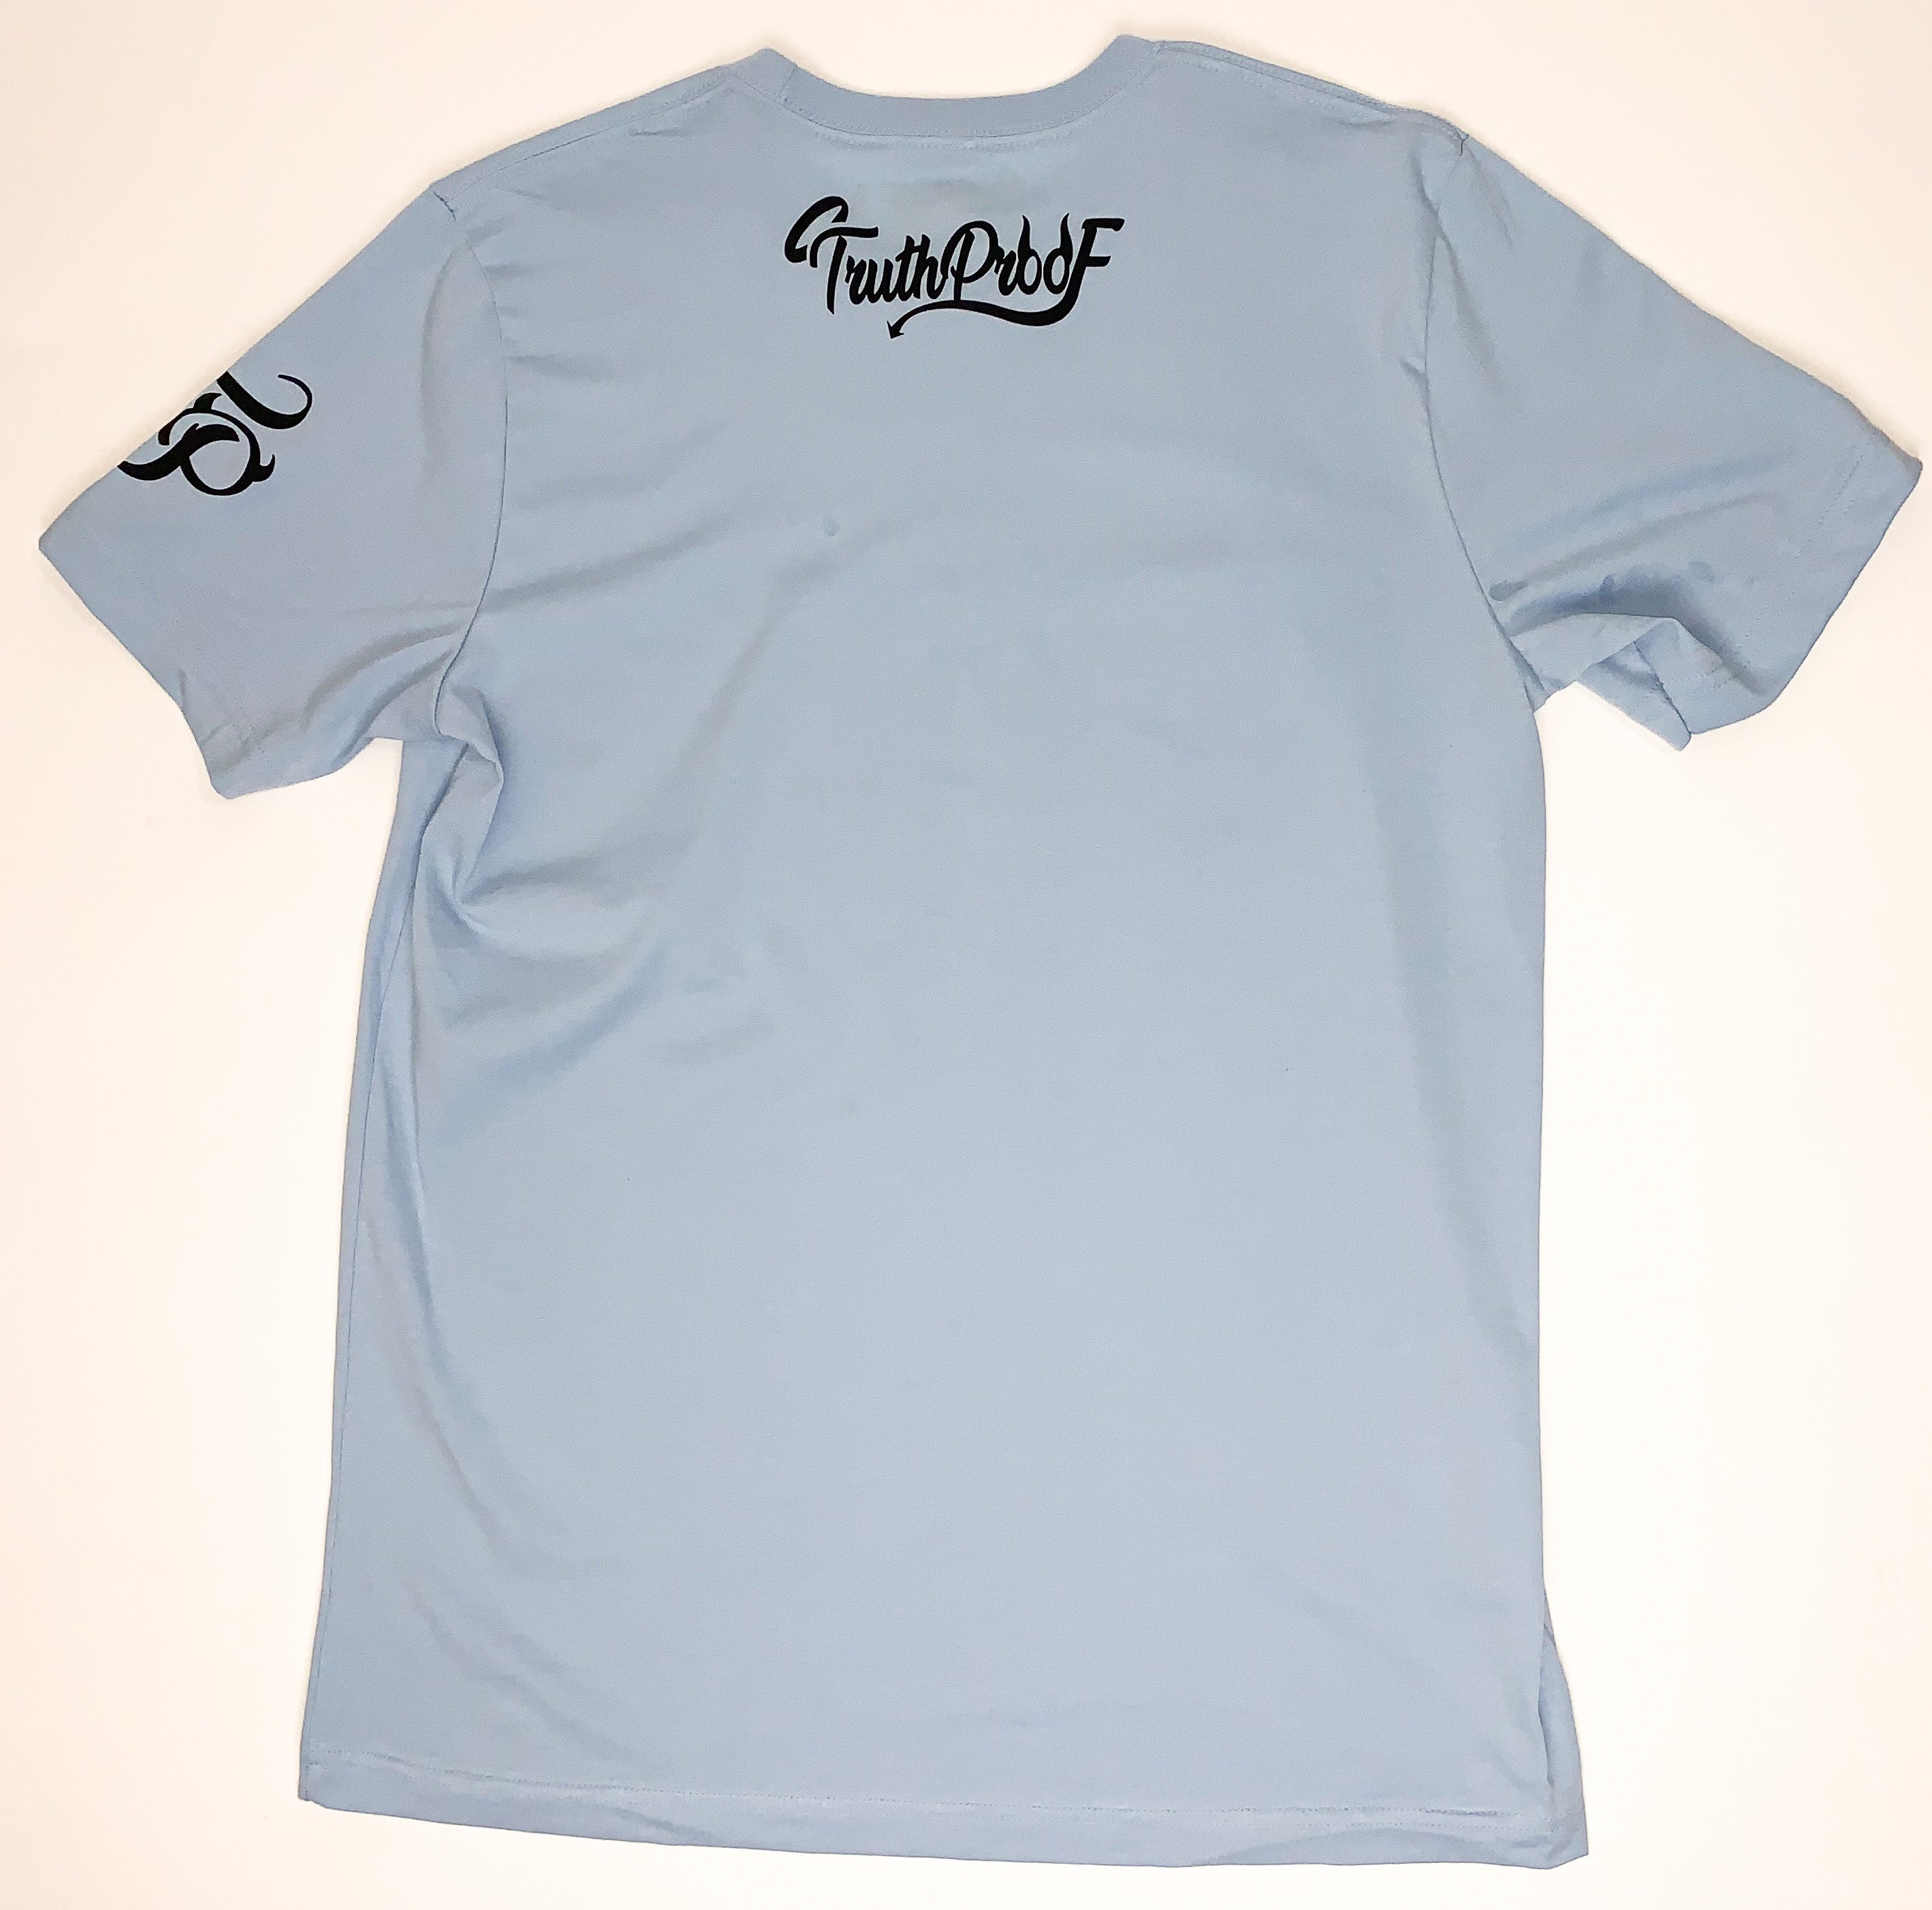 Just The Tip... I Promise-Premium Baby Blue T-Shirt